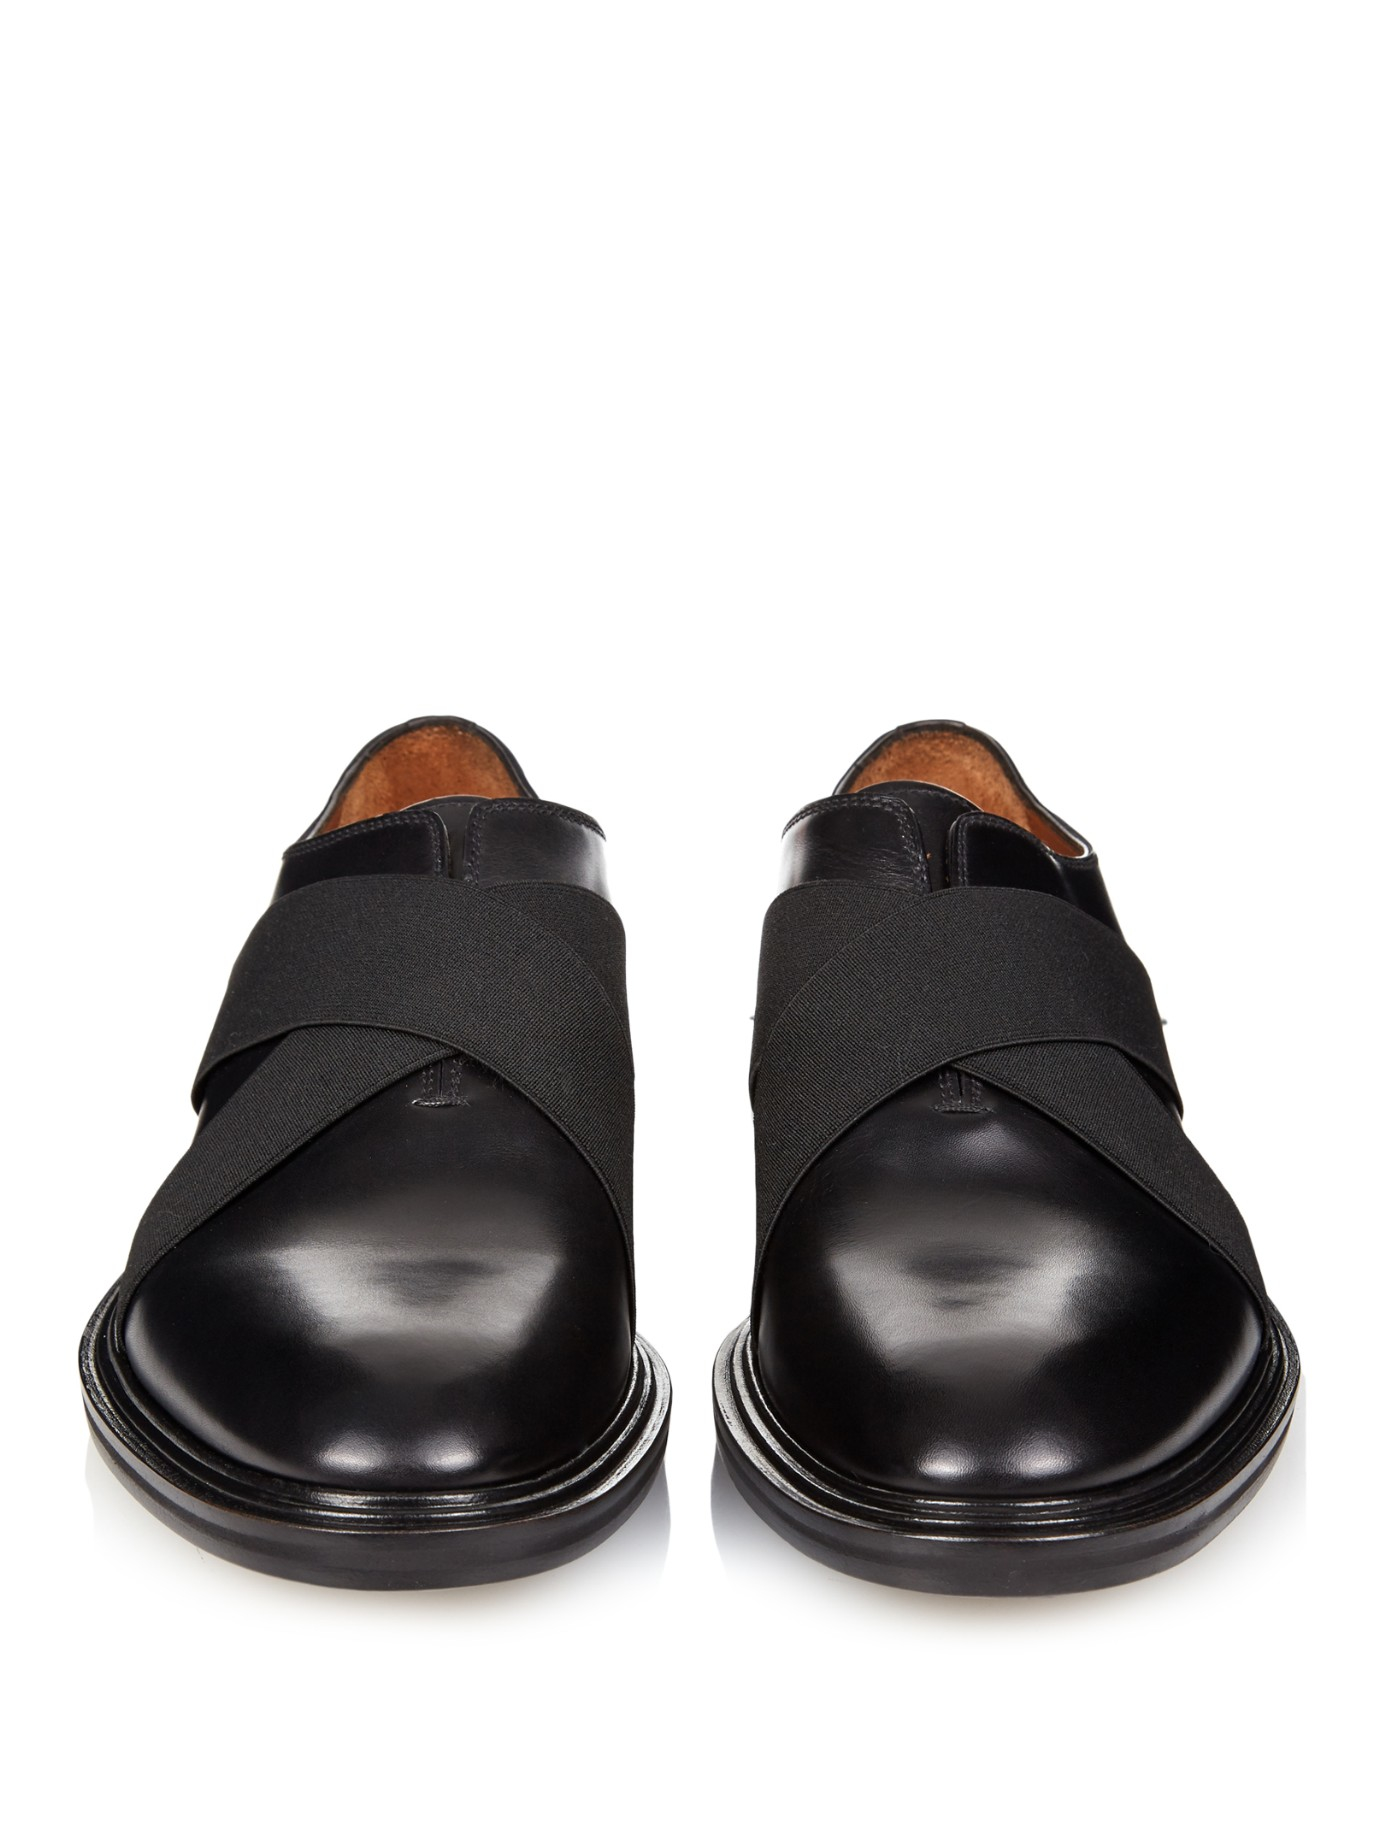 givenchy-black-elastic-straps-leather-derby-shoes-product-0-791742593-normal.jpeg